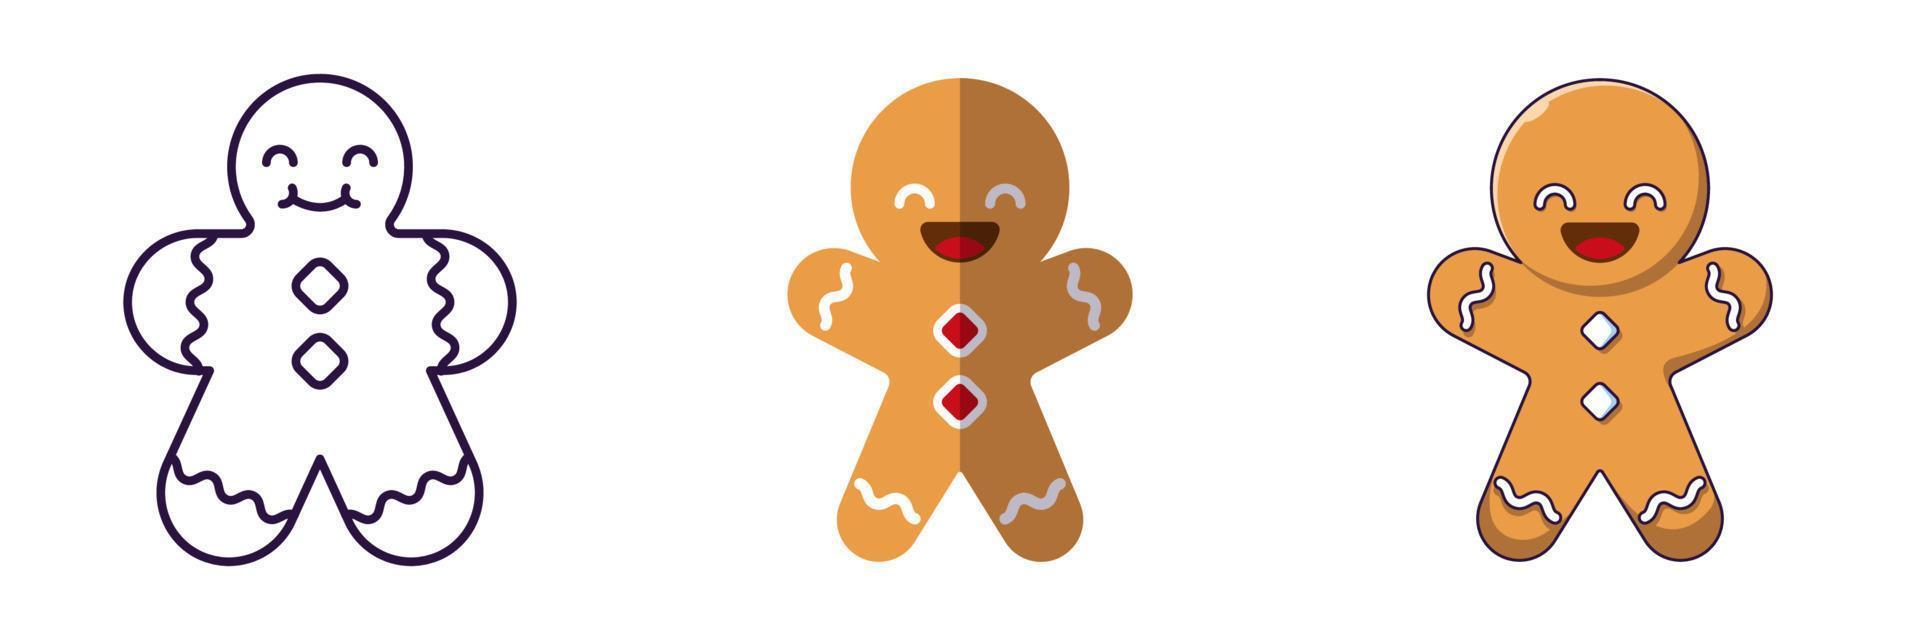 Merry Christmas and Happy New Year concept. Collection of icon of ginger man in line, flat and cartoon styles for web sites, adverts, articles, shops, stores vector